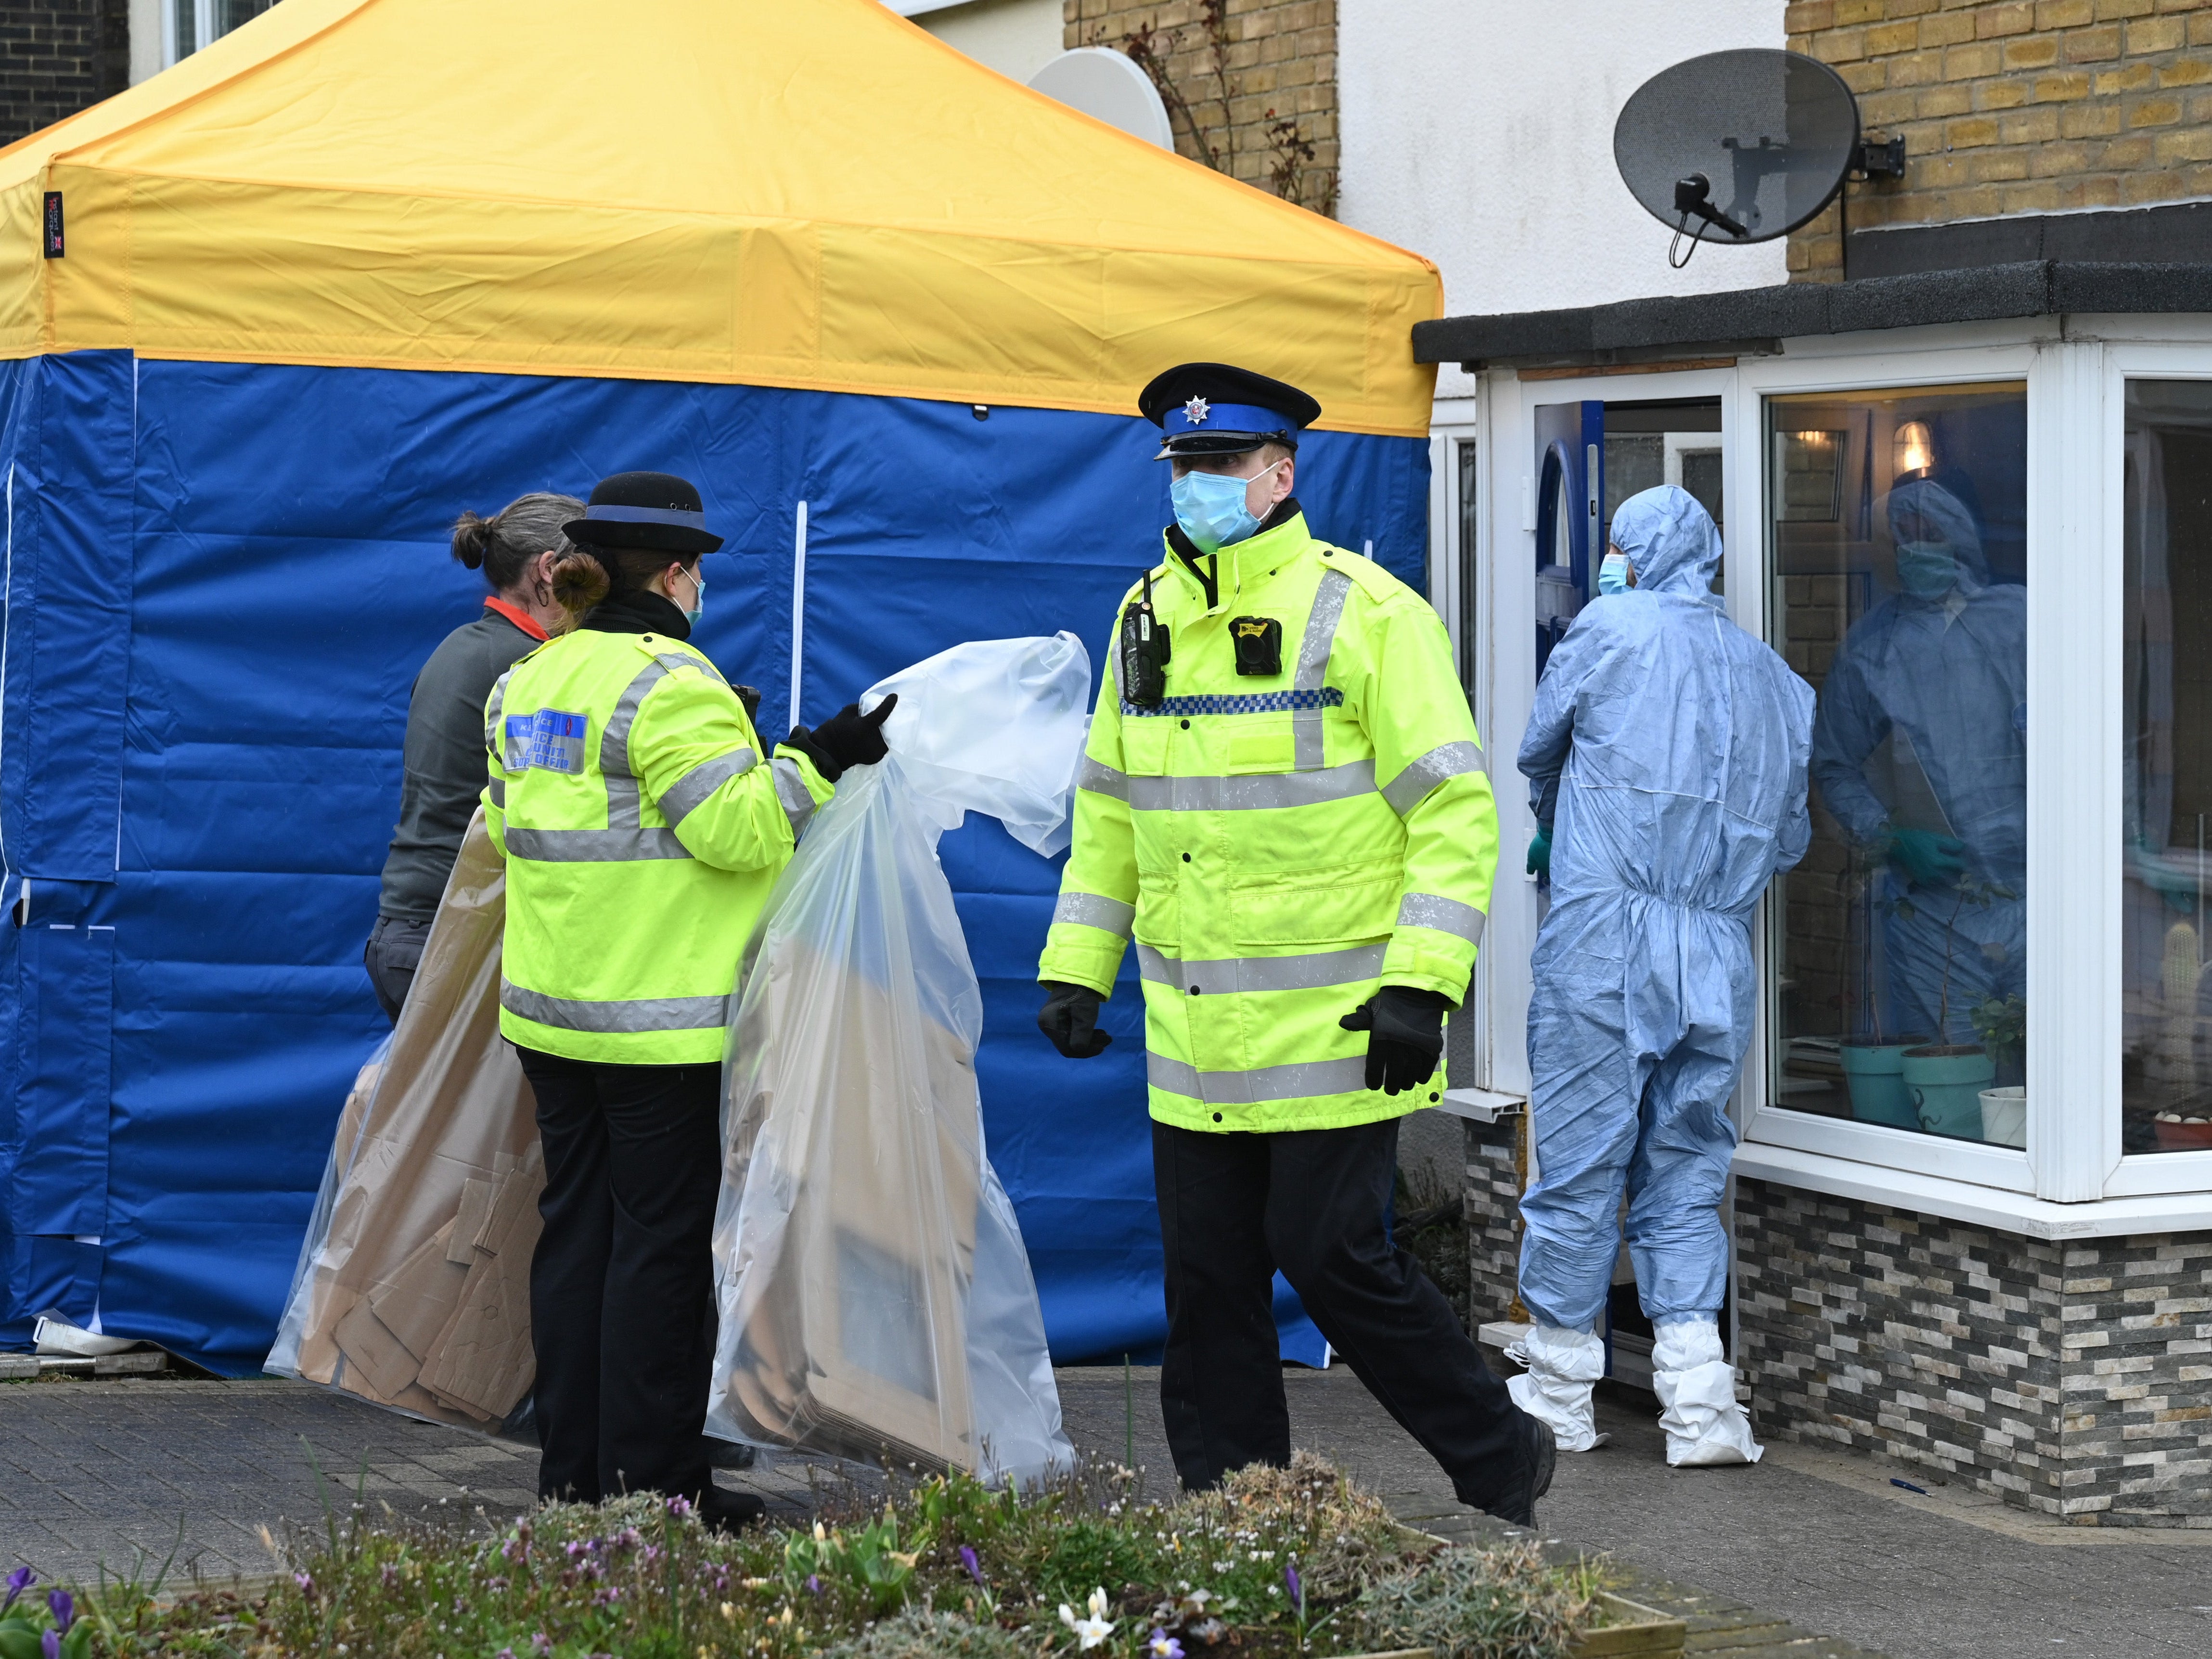 Police search a house on Freemen’s Way in Deal, Kent